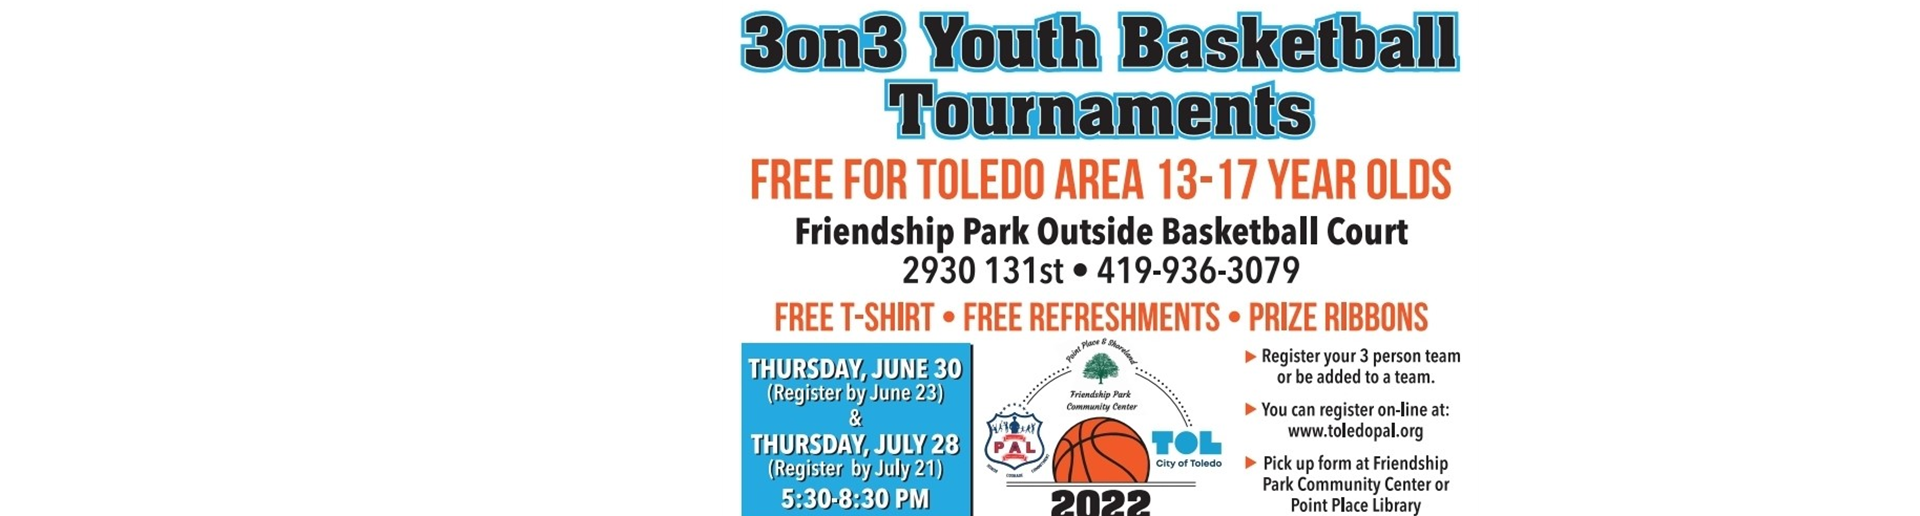 3 on 3 Youth Basketball Tournaments